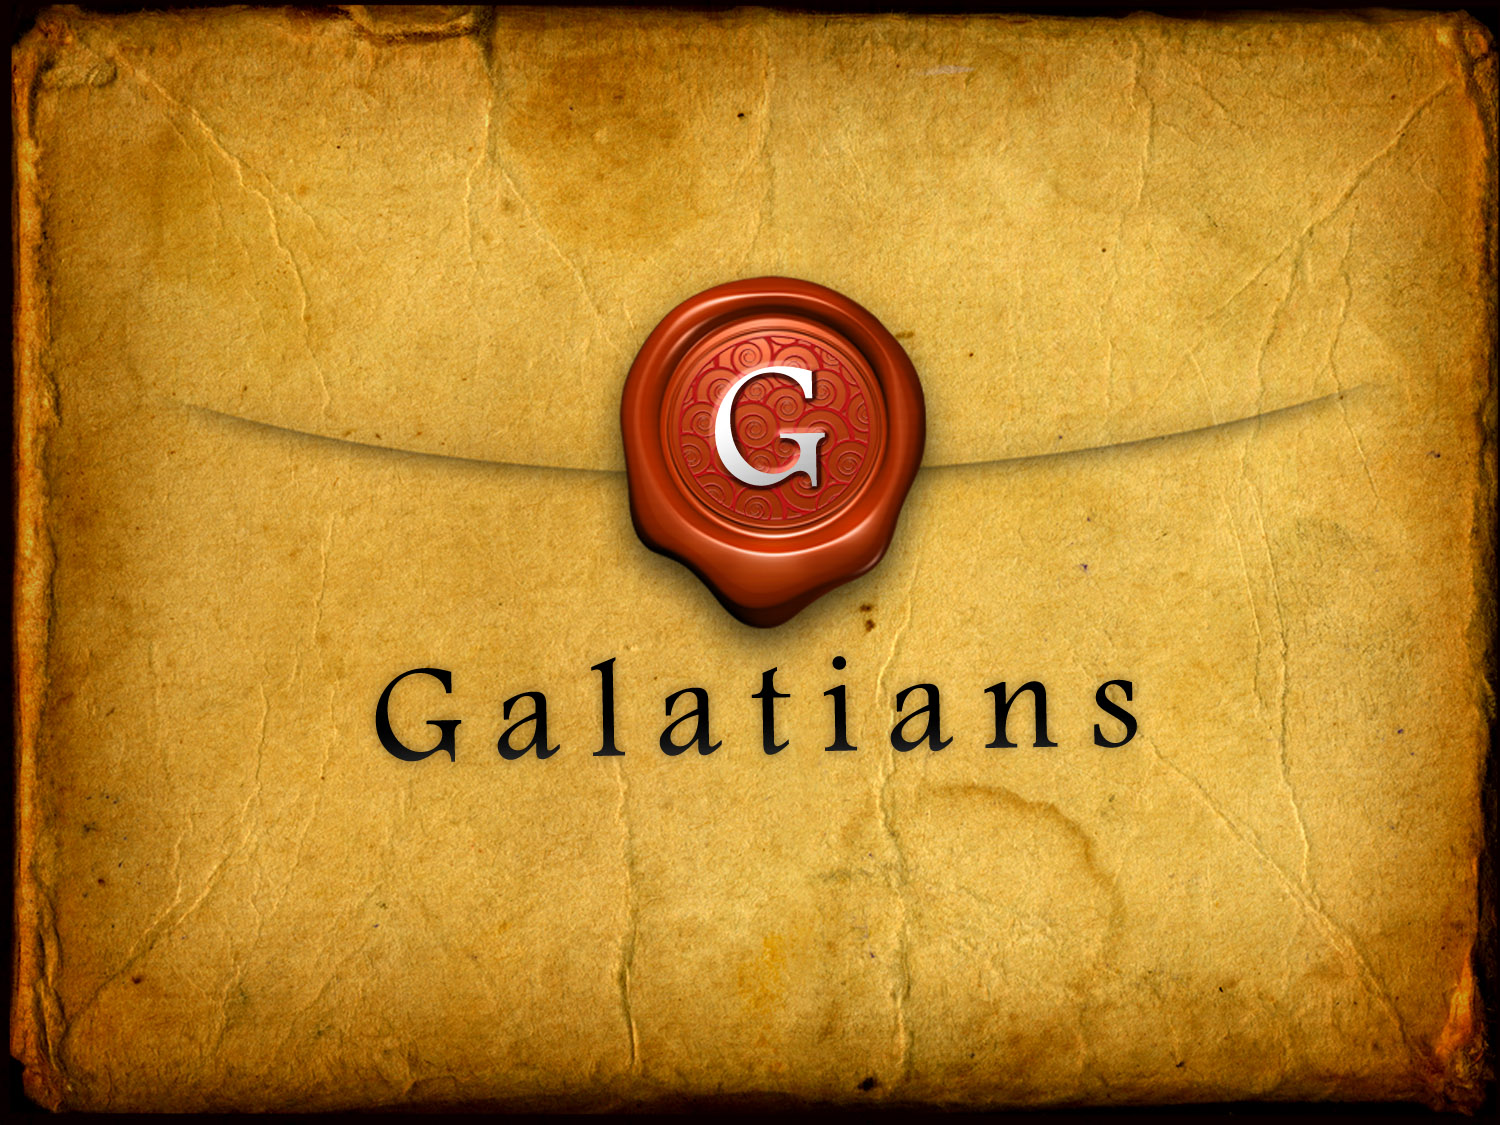 The Book of Galatians 6:6-10